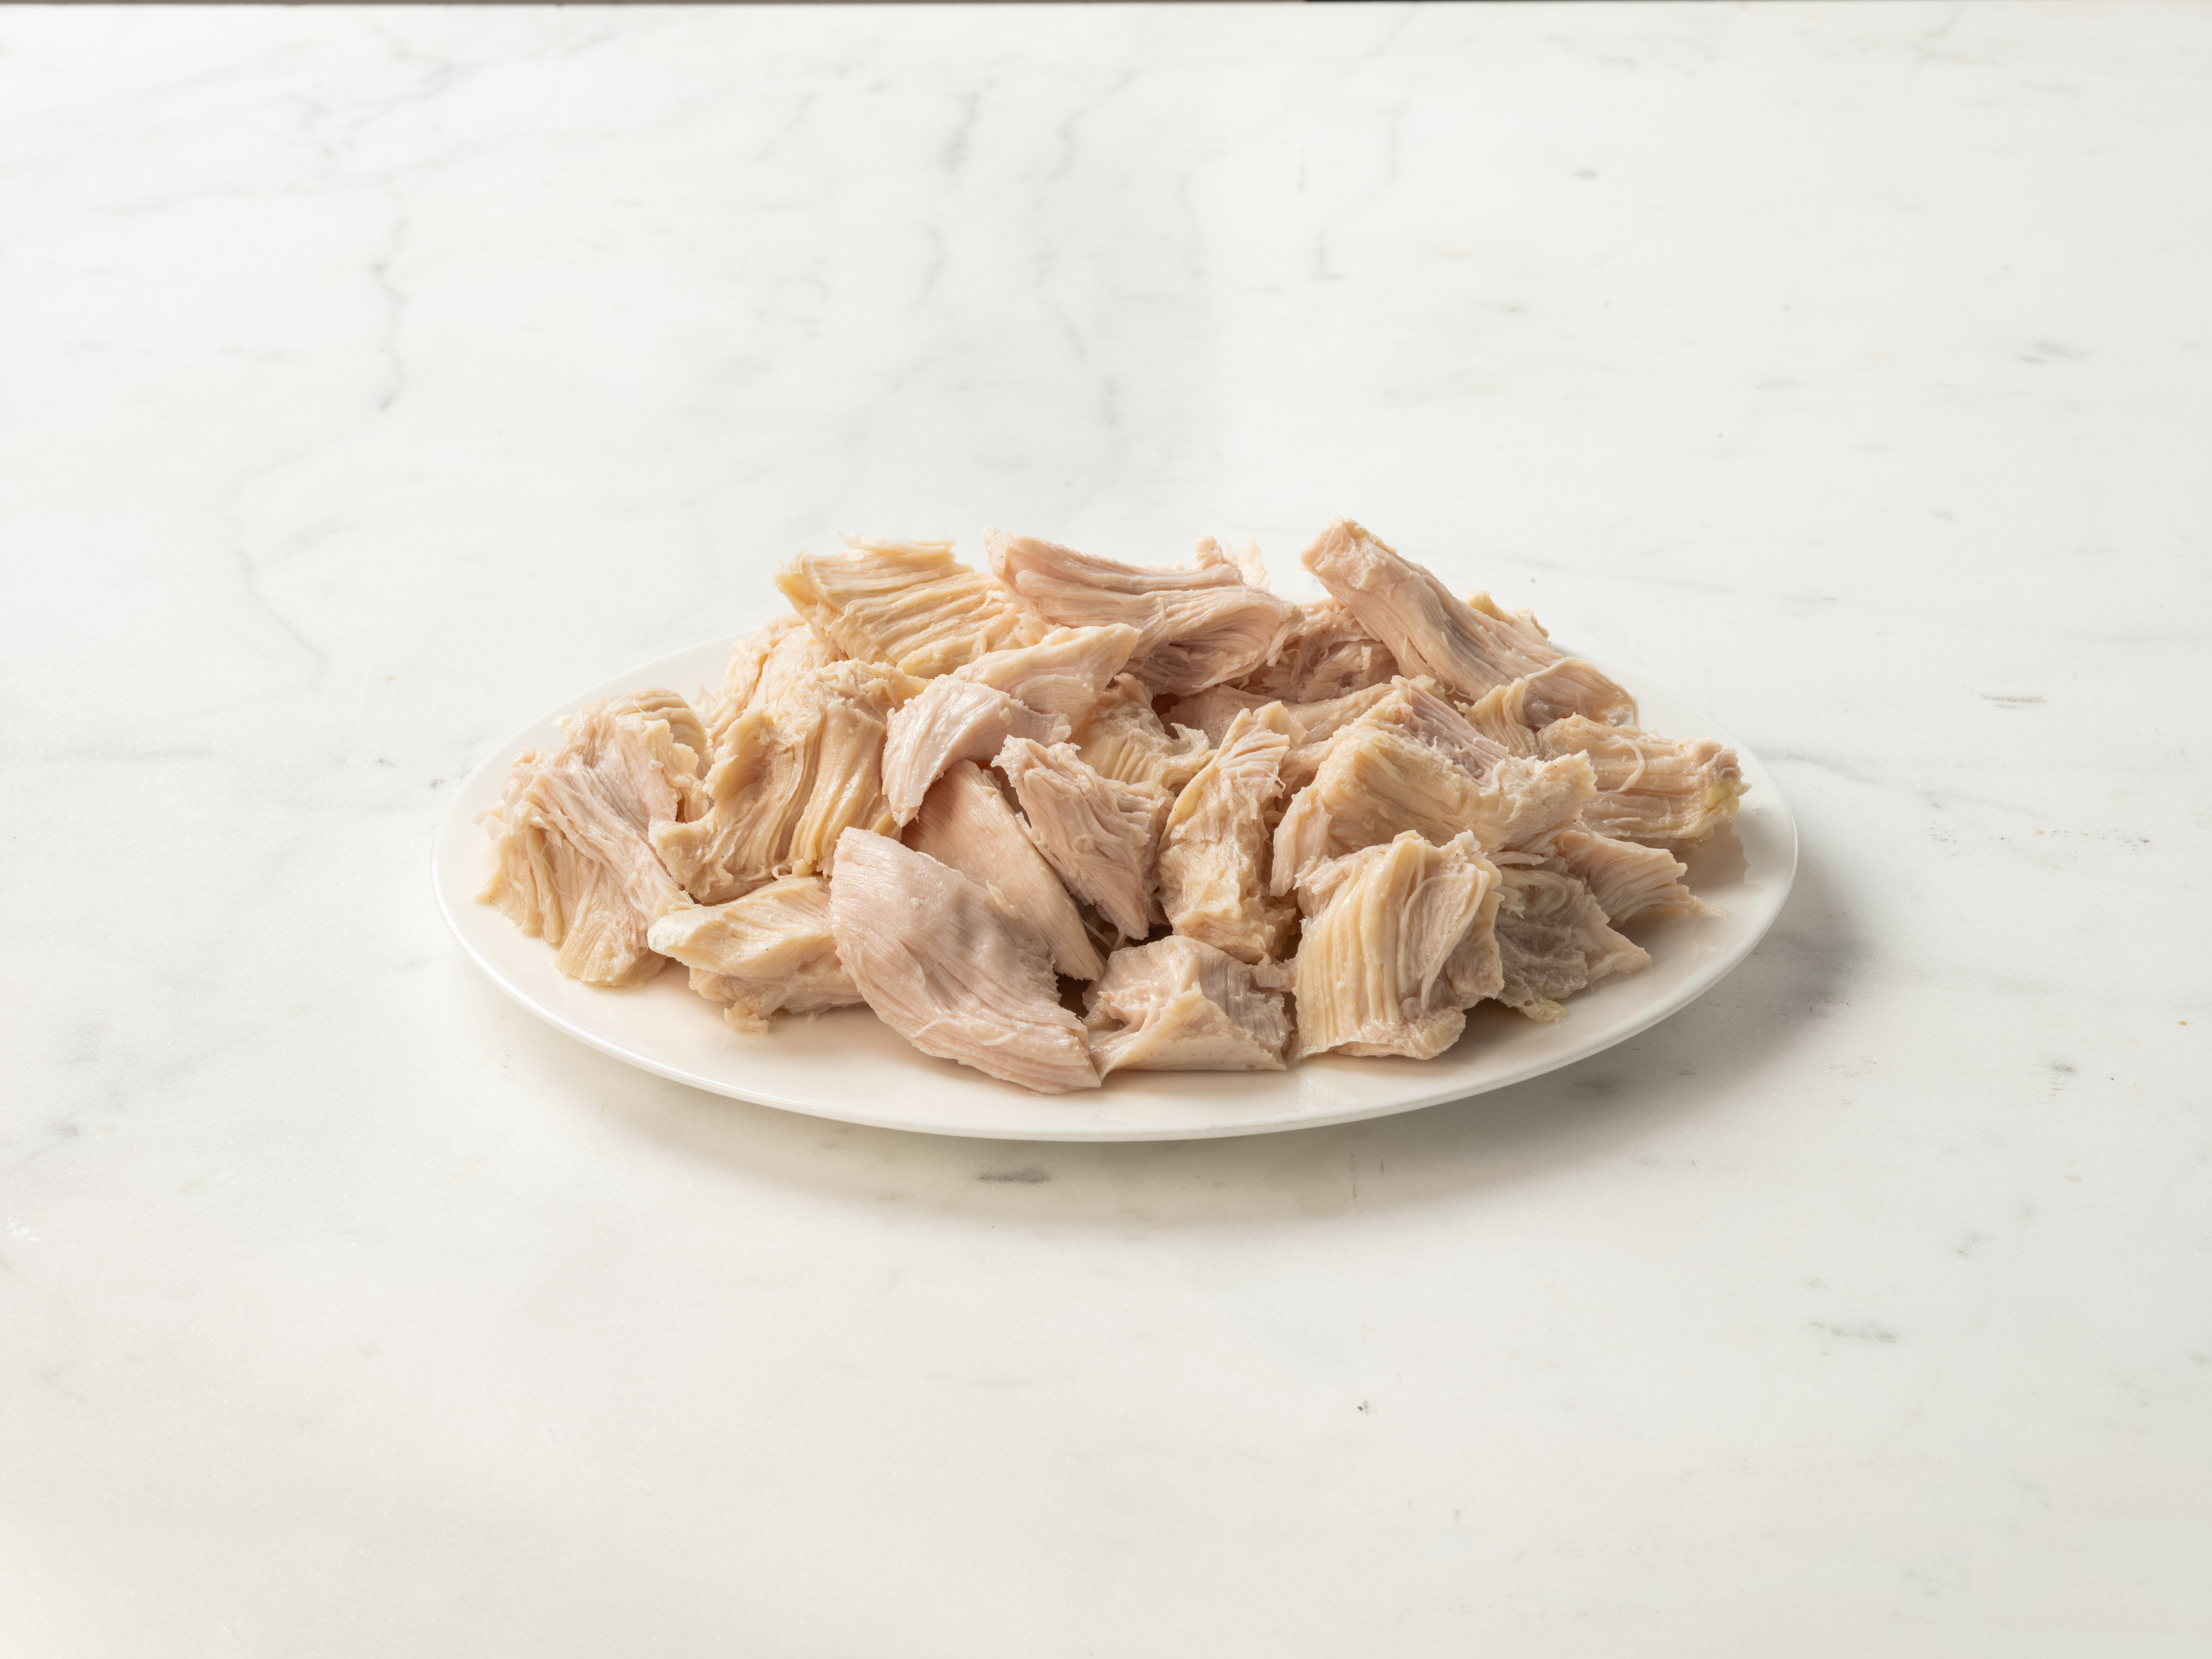 chicken pieces on a white plate